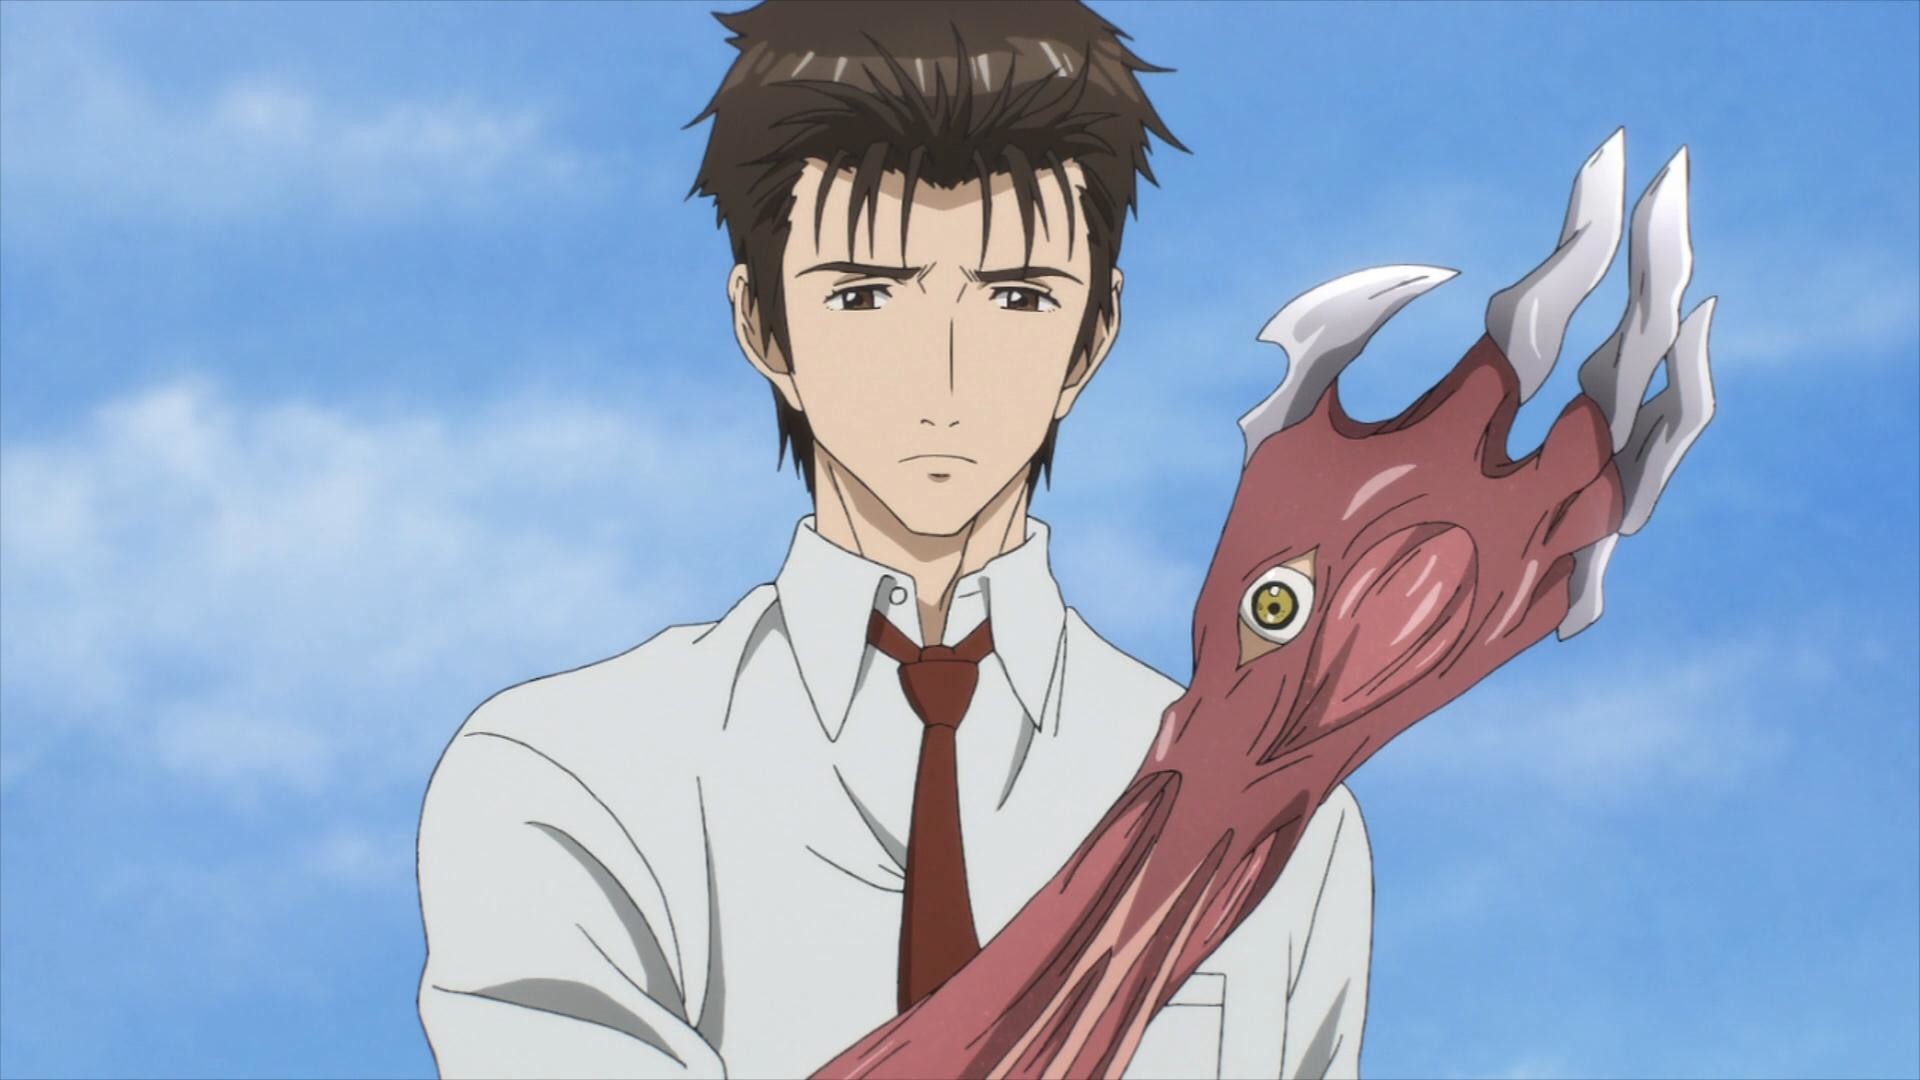 1920x1080 For whatever reason, I thought that Parasyte: The Maxim was a comedy horror  anime before I started watching it. I was extremely wrong.